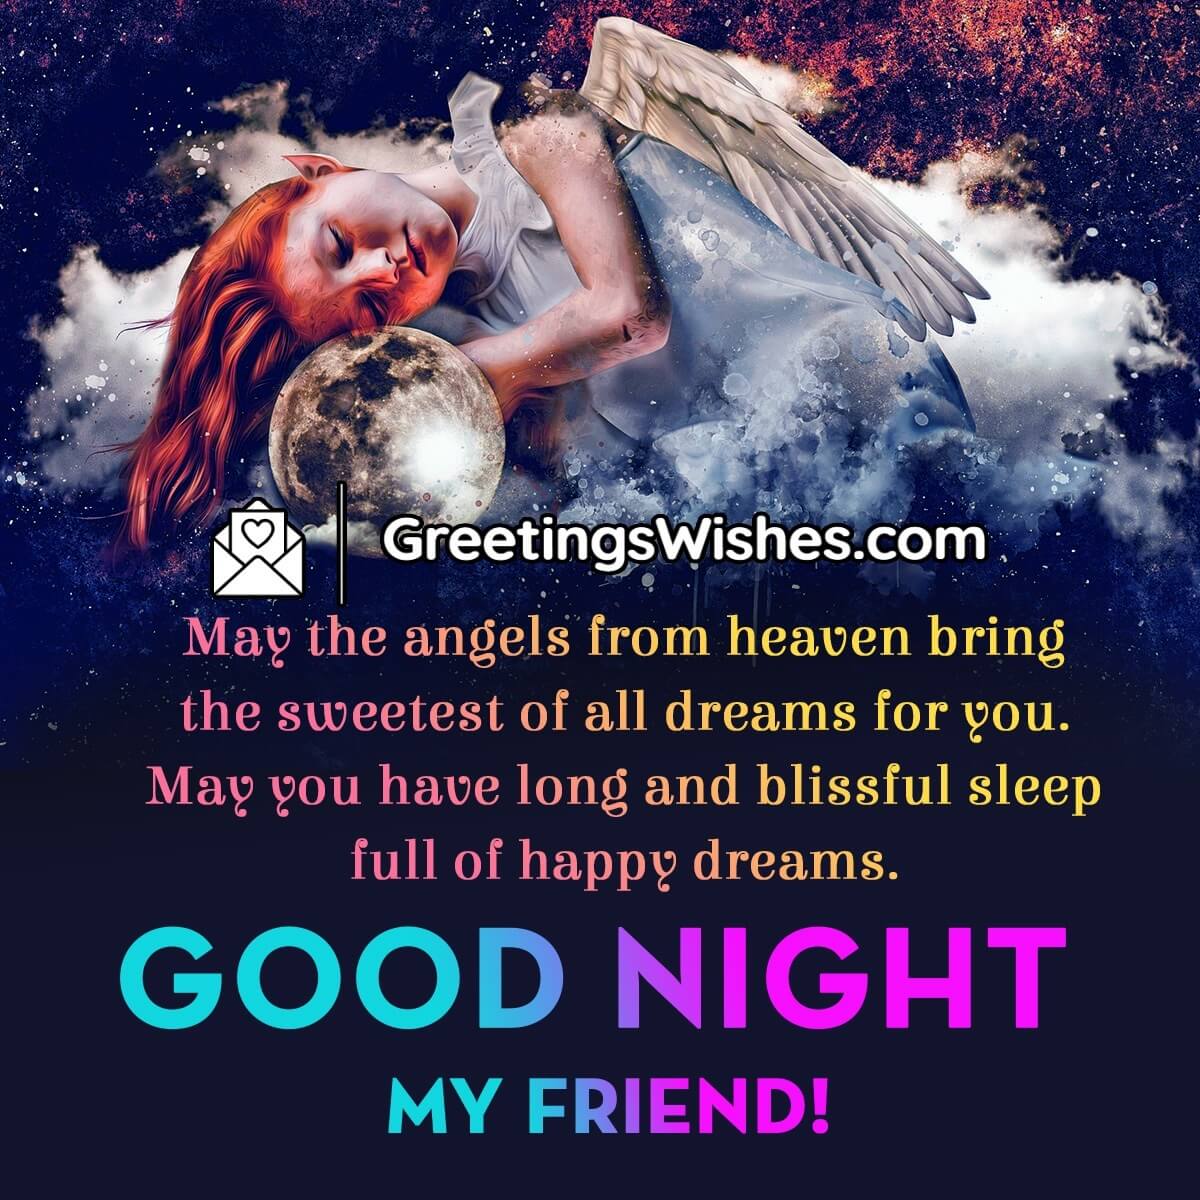 Good Night Messages for Friends - Greetings Wishes